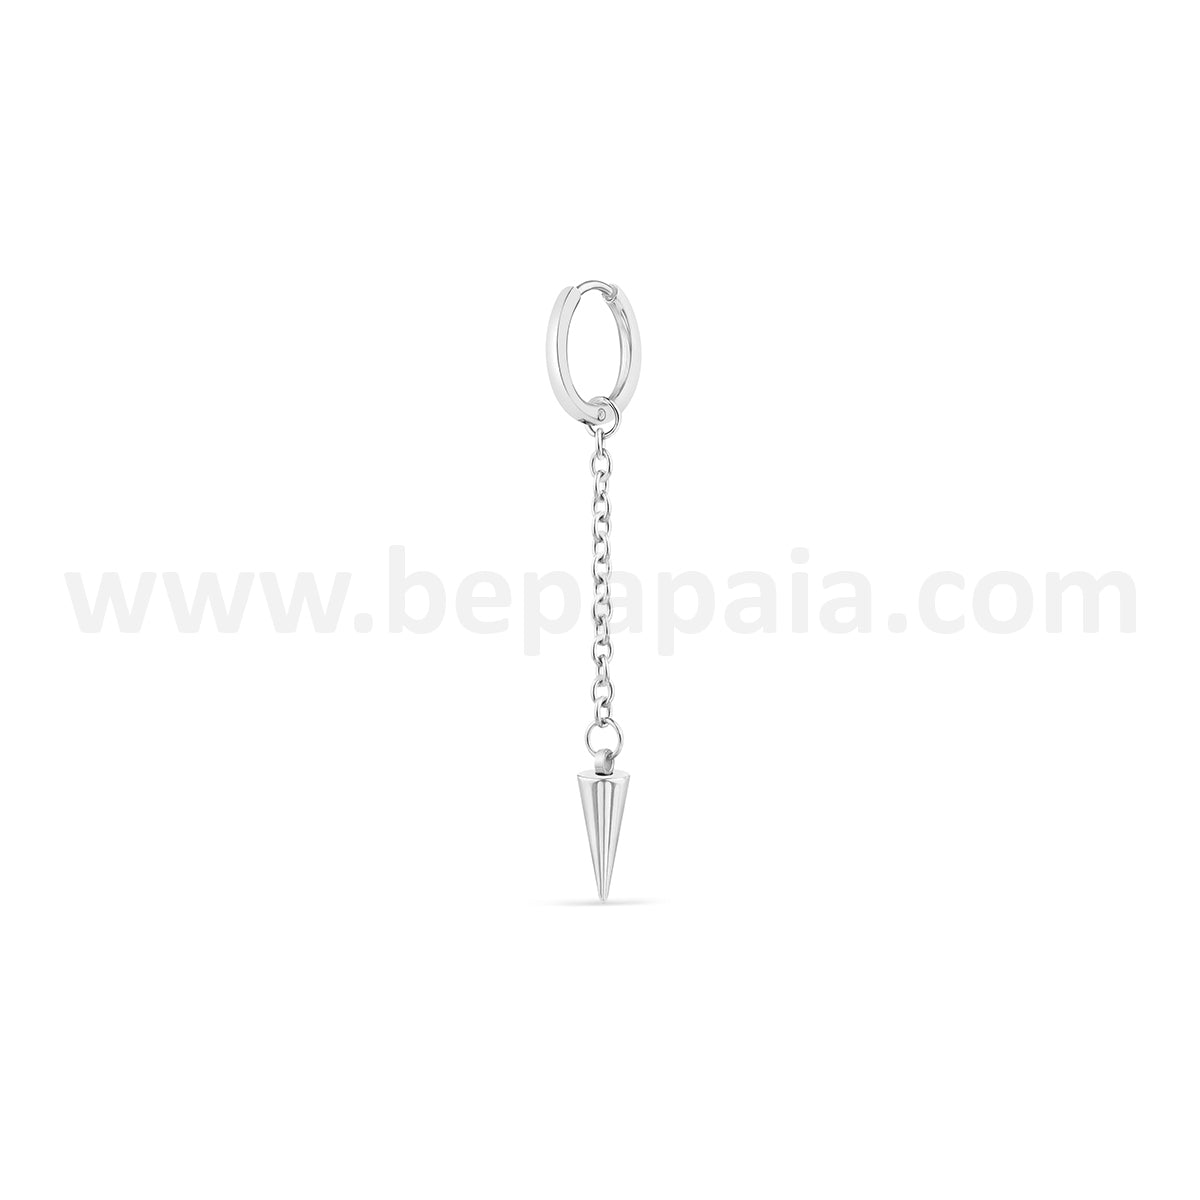 Steel hoop earring with chain and spike